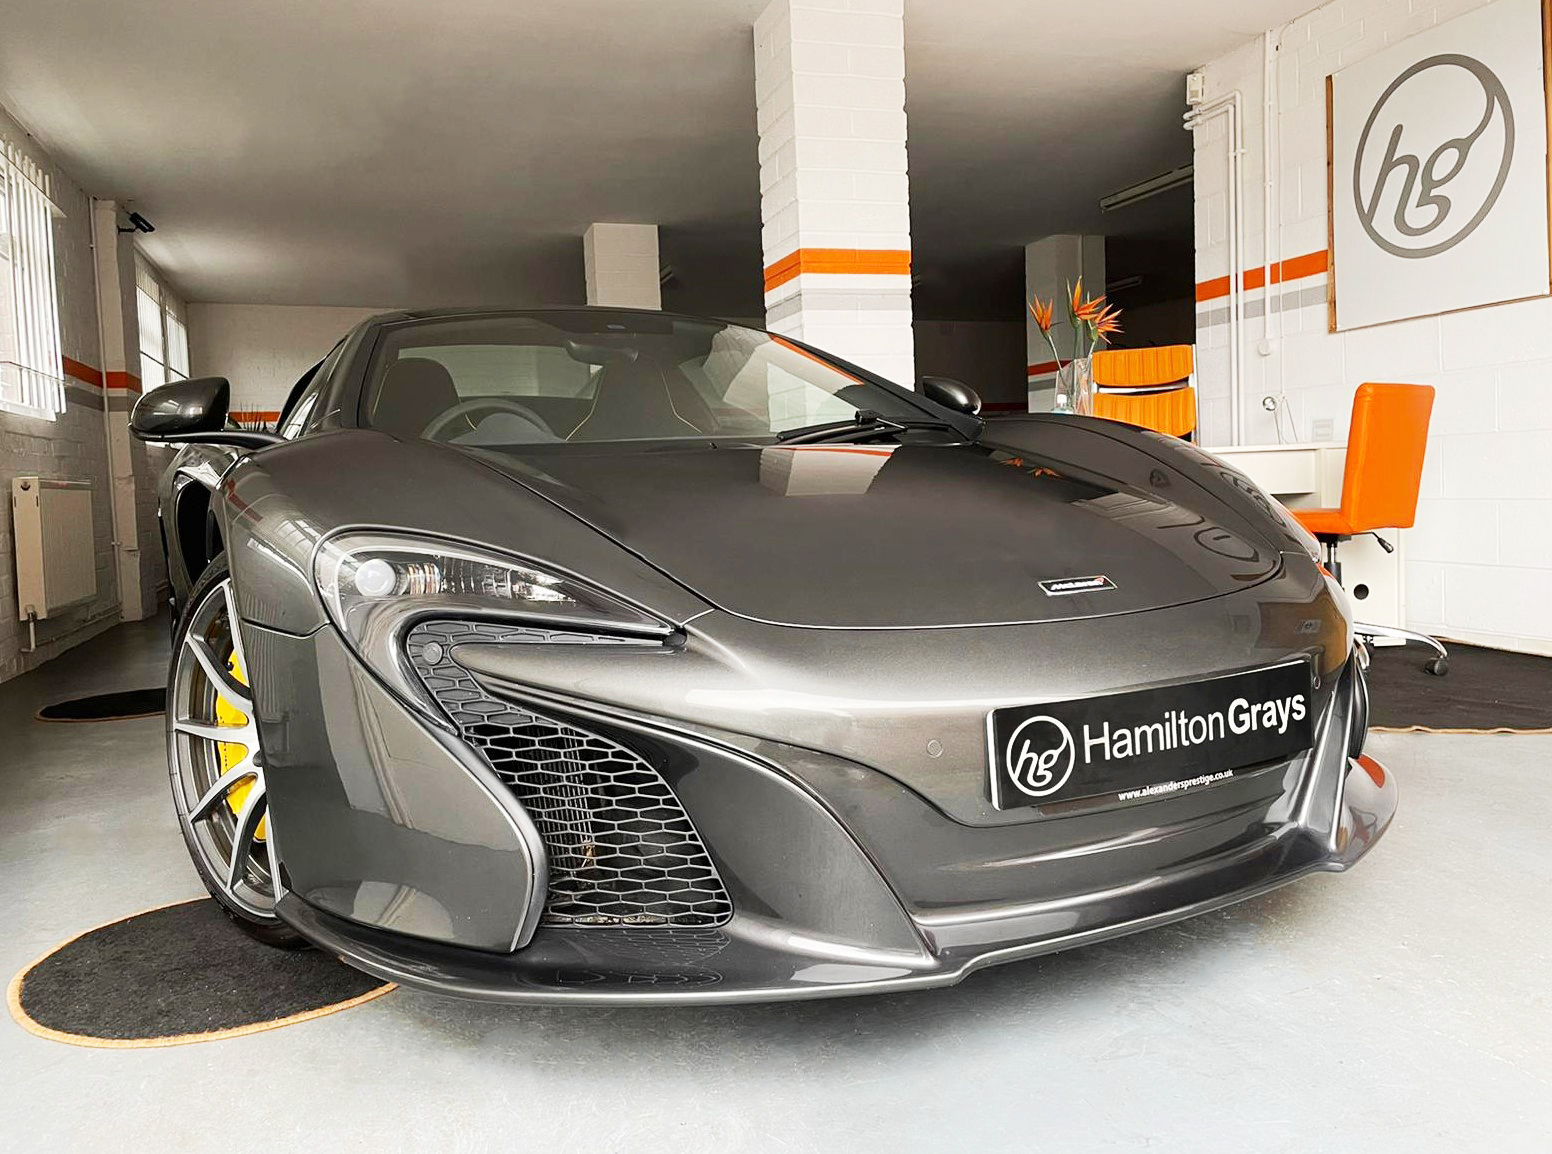 2015 (65) McLaren 650S 3.8 V8 Spider SSG. In Storm Grey Metallic with Carbon Black Alcantara, Piped in Yellow. 2016 My.. 7,345 miles. FMMSH. An A1 Example. ‘Service No.5’ just completed.  (SOLD)